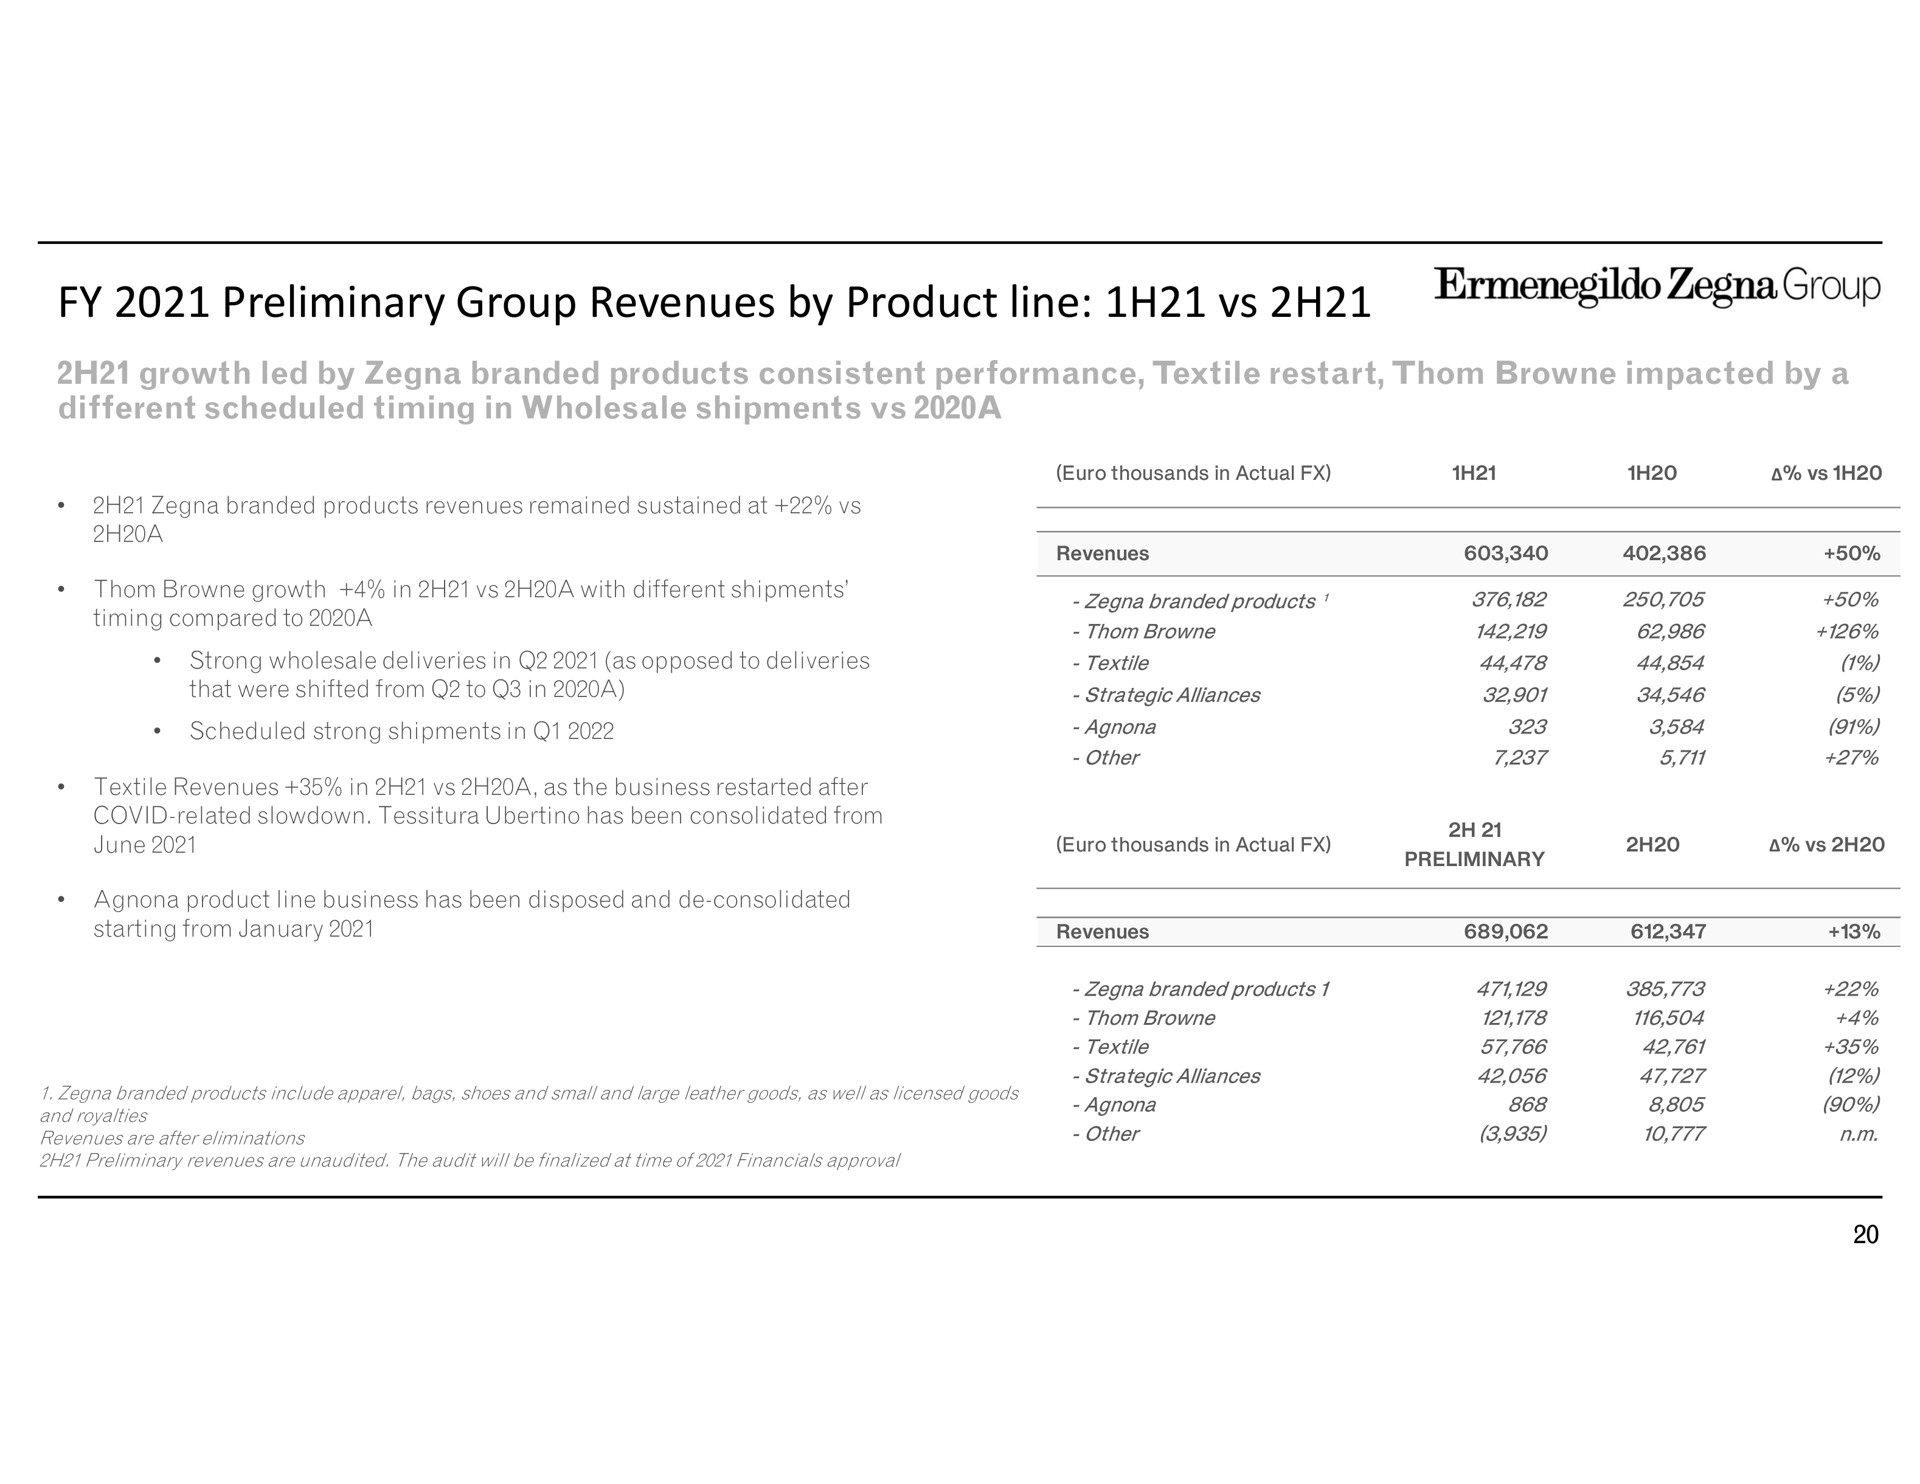 preliminary group revenues by product line growth led by branded products consistent performance textile restart impacted by a different scheduled timing in wholesale shipments a | Zegna